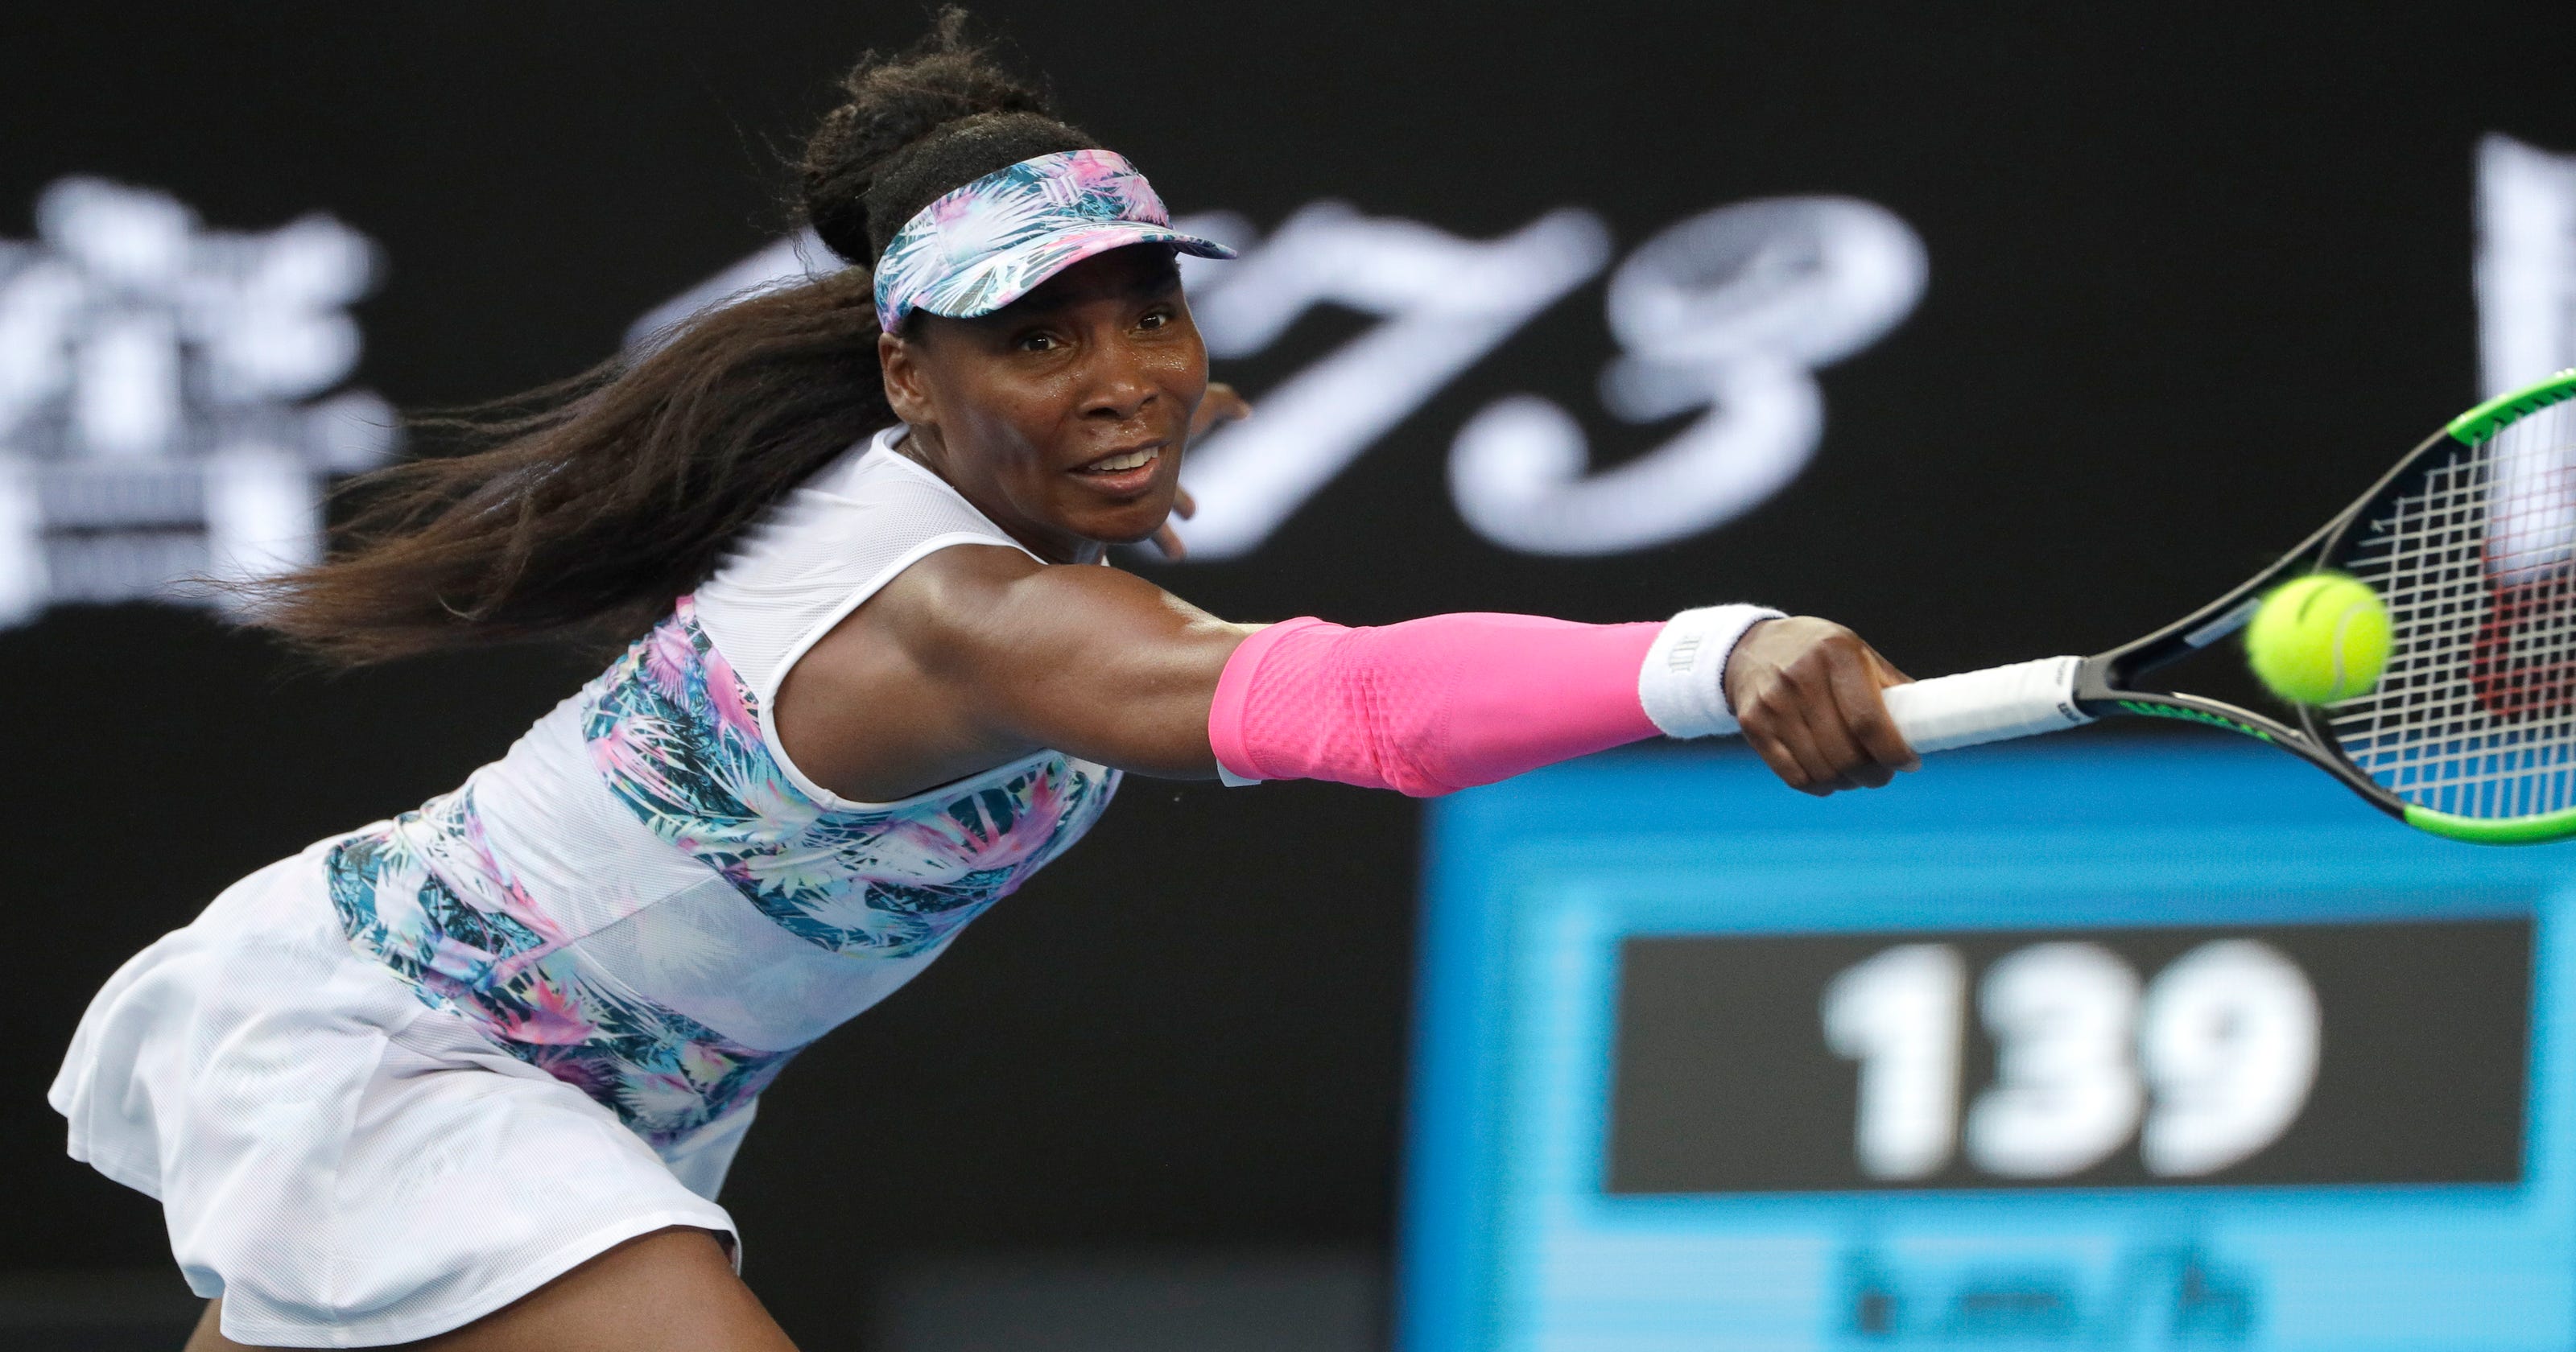 Game from quick exit, Venus Williams wins at Australian Open3200 x 1680